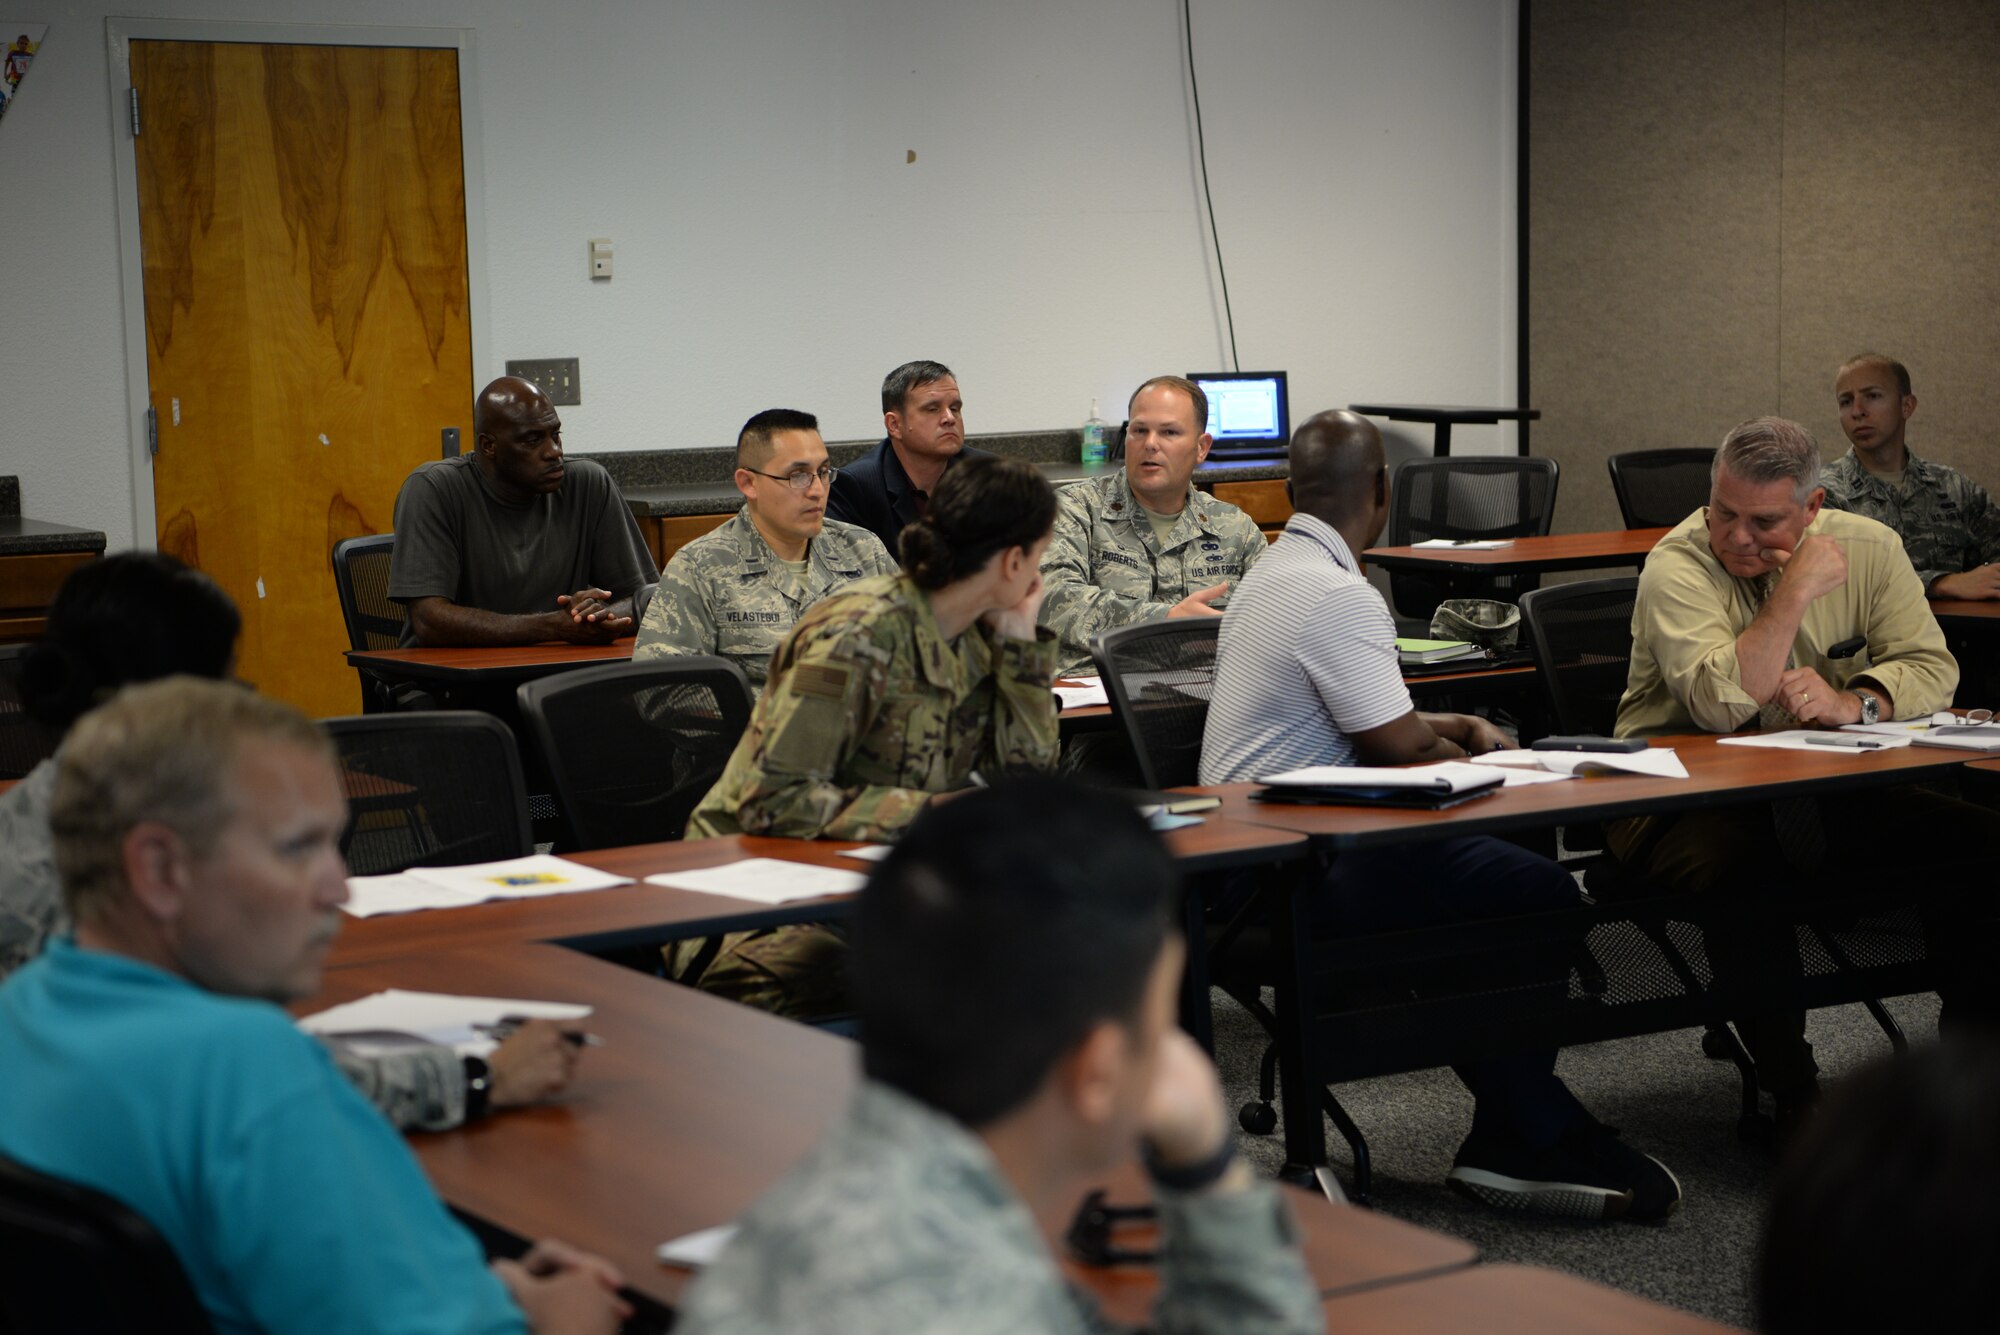 U.S Air Force Maj. Matthew Roberts, 81st Logistics Readiness Squadron commander, discusses changes being made to Keesler's hurricane plan during an emergency management working group inside the Sablich Center at Keesler Air Force Base, Mississippi, May 21, 2019. This emergency management working group was centered around Keesler's hurricane plan where base personnel discussed changes to the evacuation procedures, hurricane ride-out team sizes and more. (U.S Air Force Photo by Airman 1st Class Spencer Tobler)